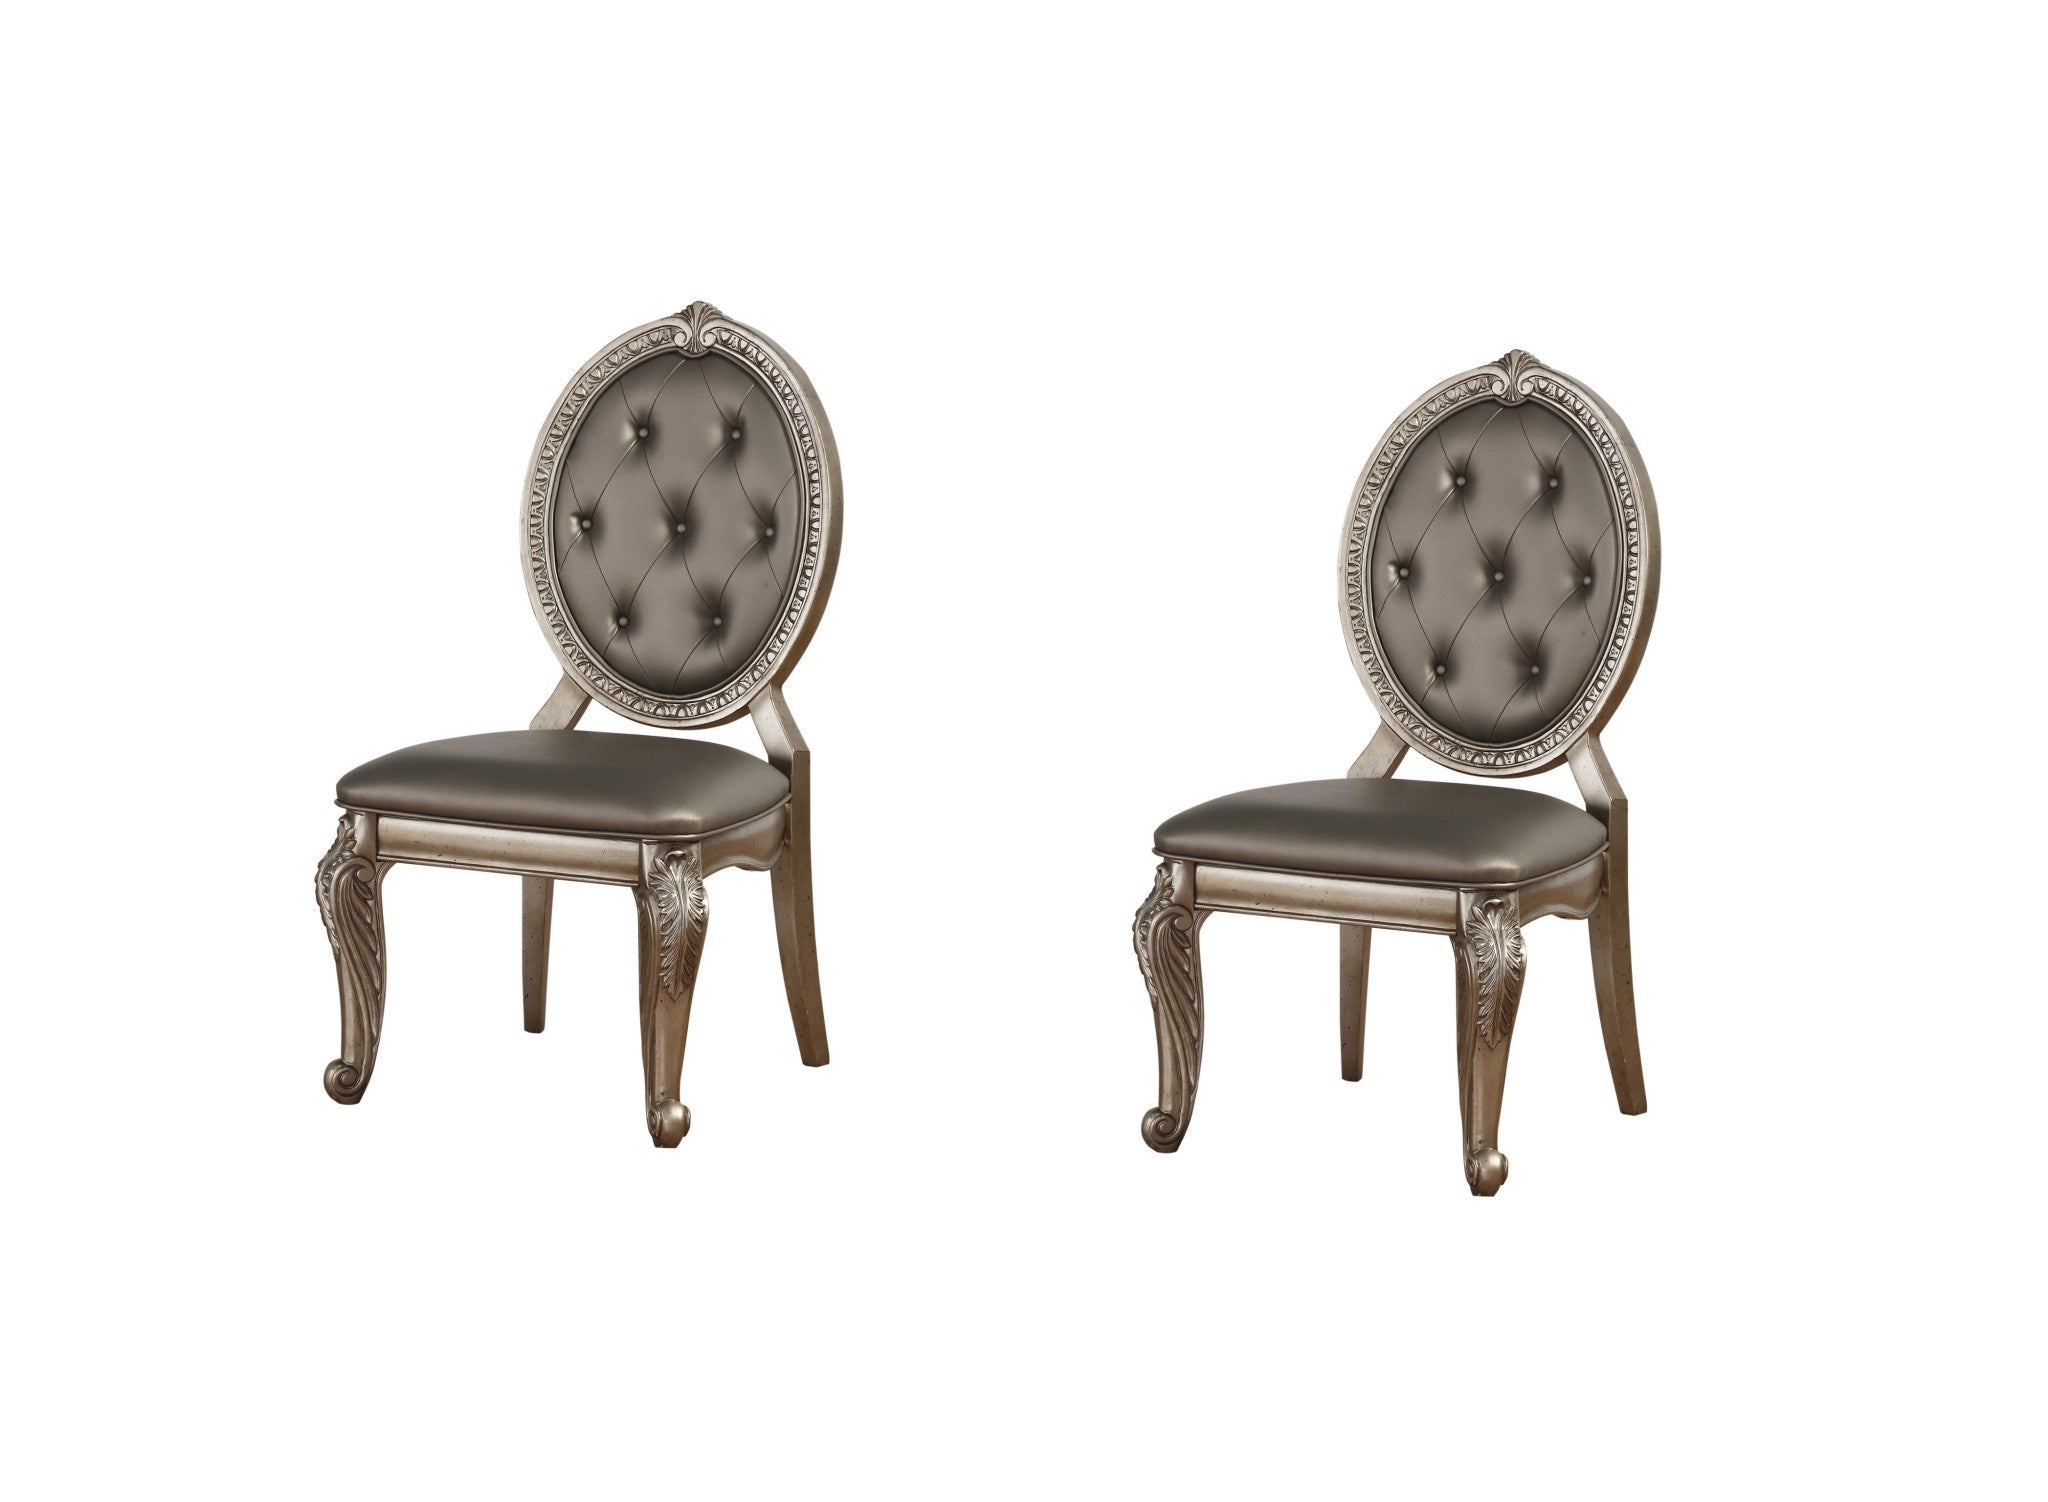 Set of Two Tufted Champagne Upholstered Faux Leather Dining Side Chairs